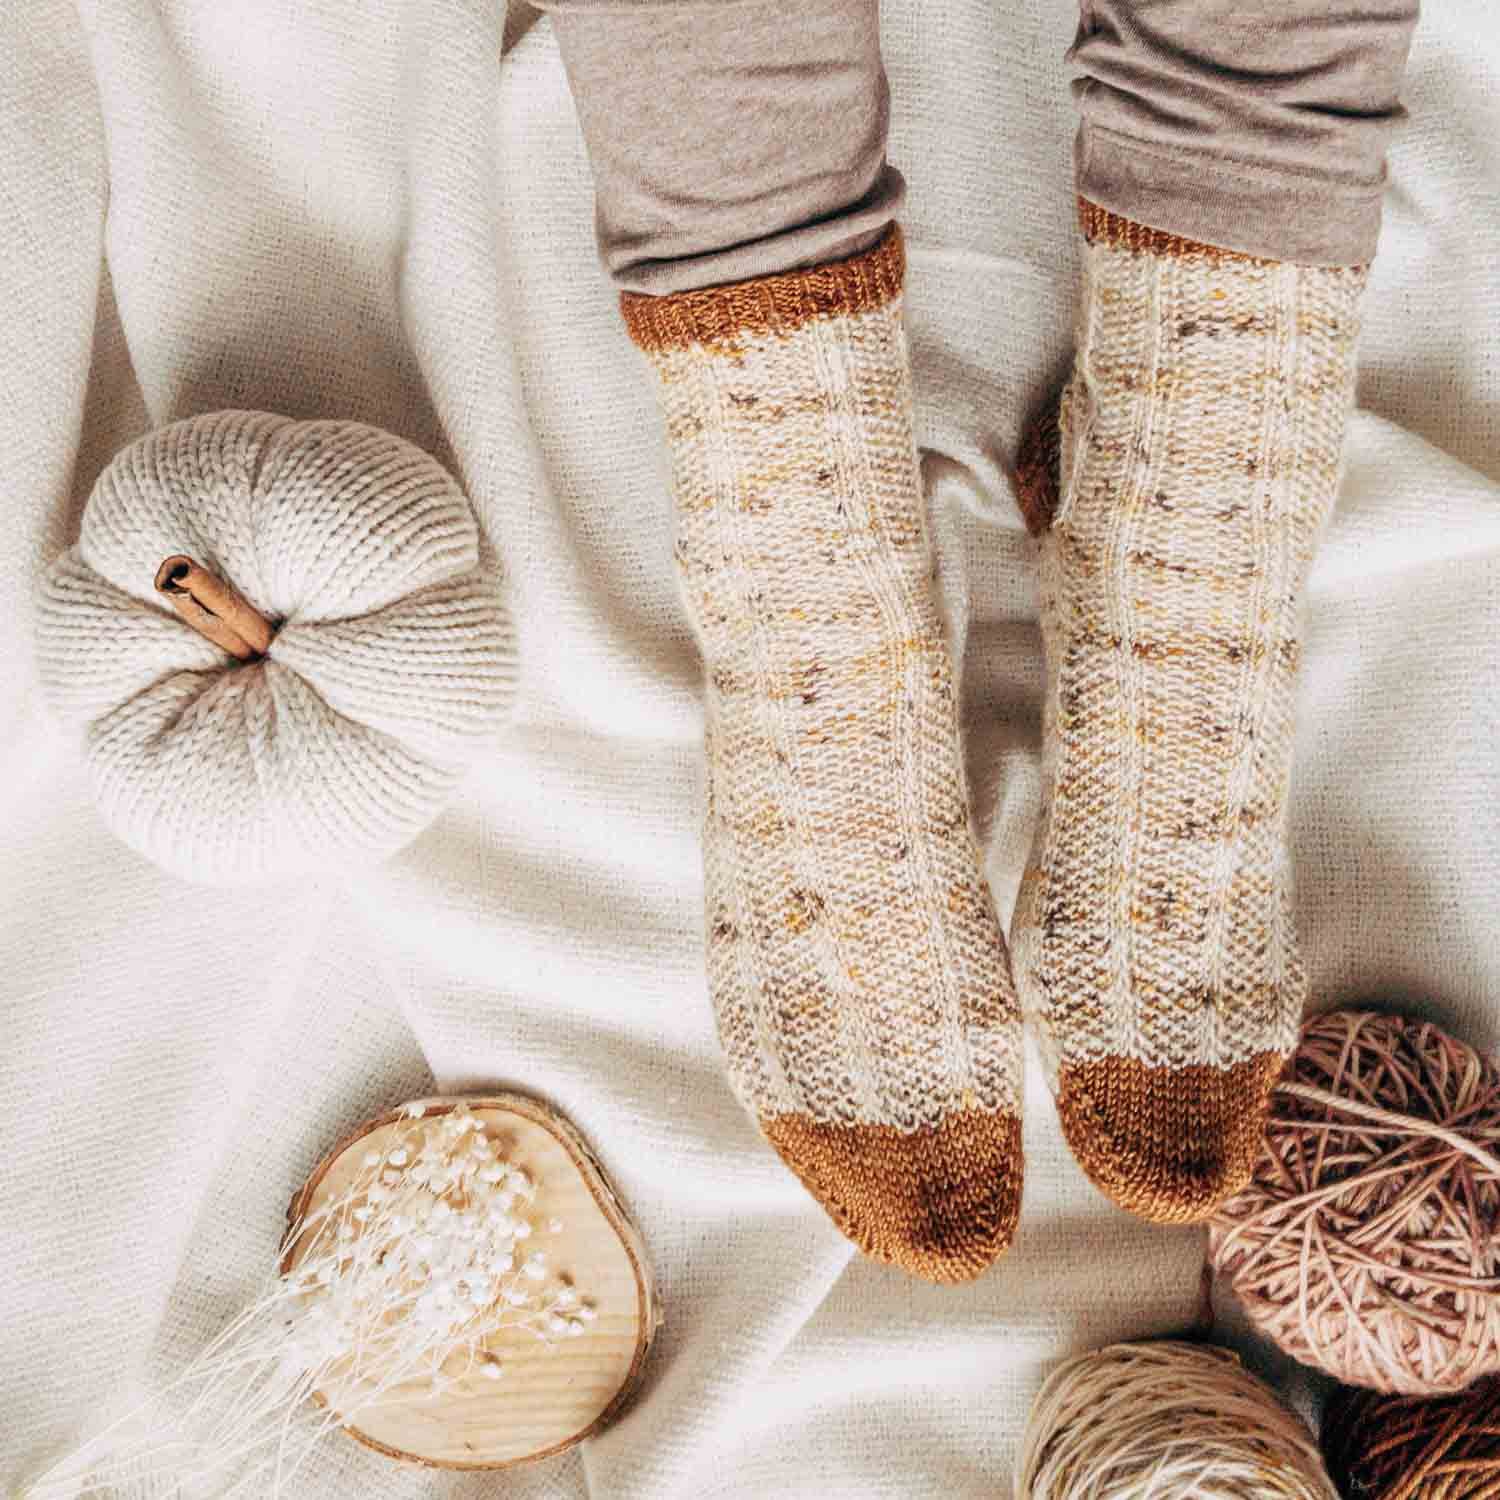 Easy Textured Socks with Stripes Knitting Pattern - Textural Socks